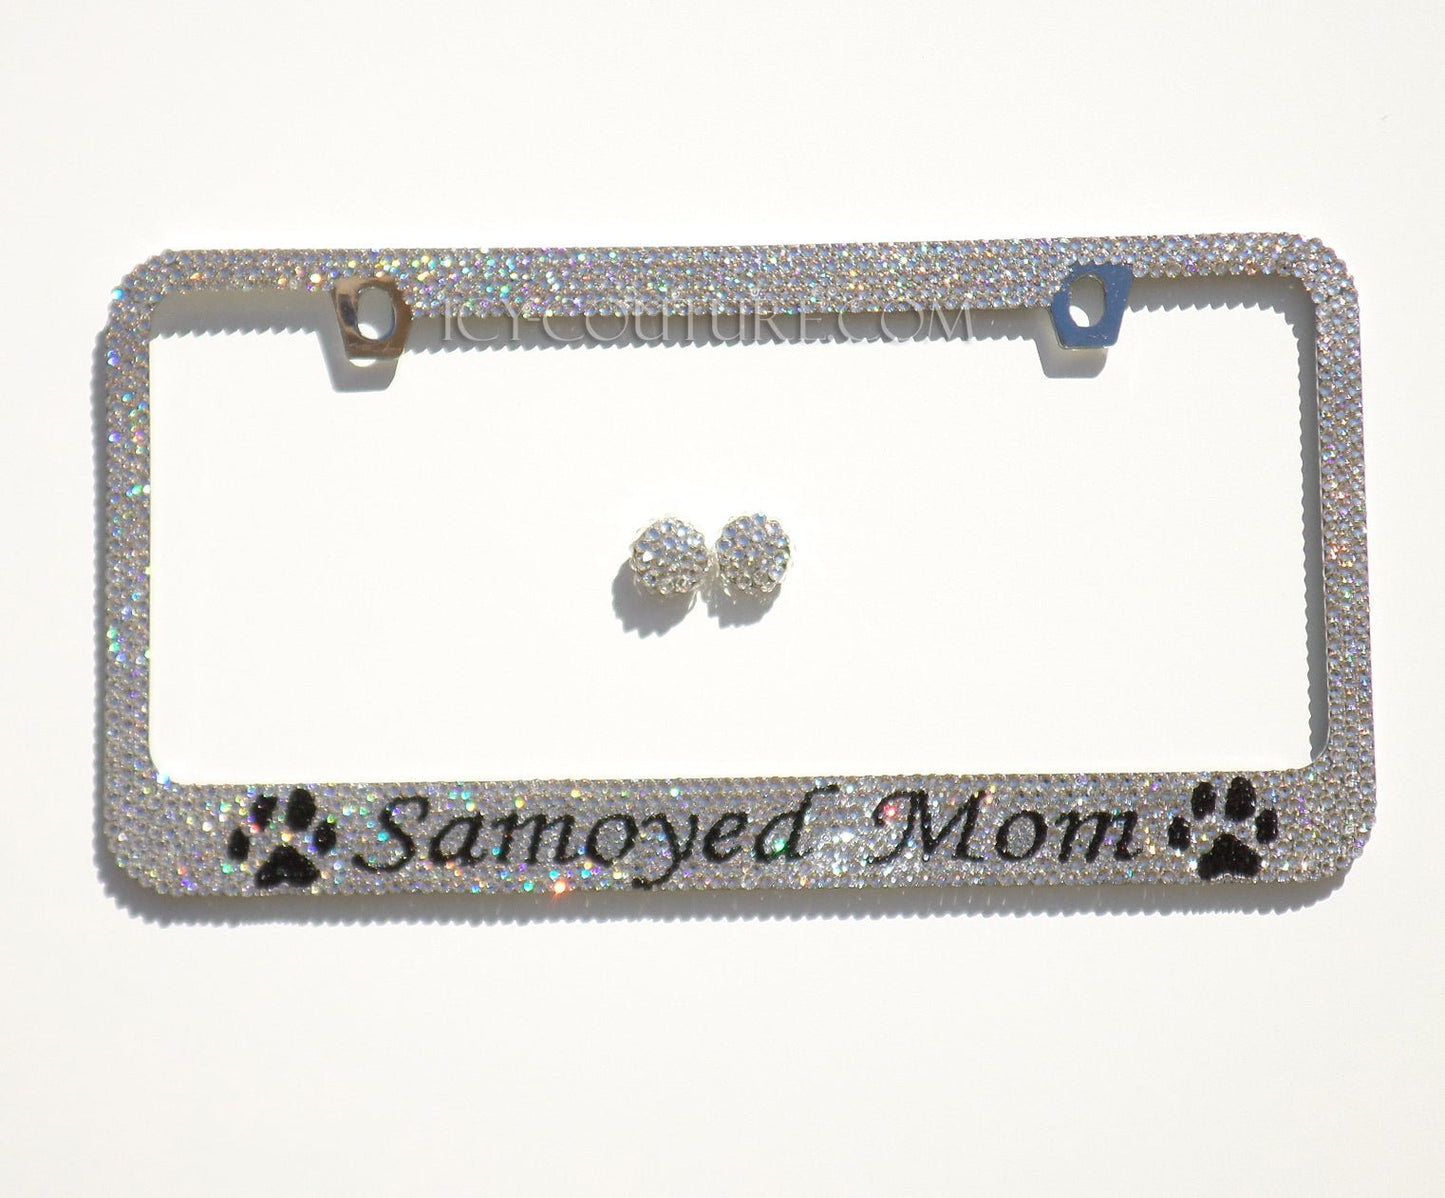 Samoyed Mom with Paws Custom Bling License Plate Frames With Swarovski Crystals, Bedazzled by ICY Couture